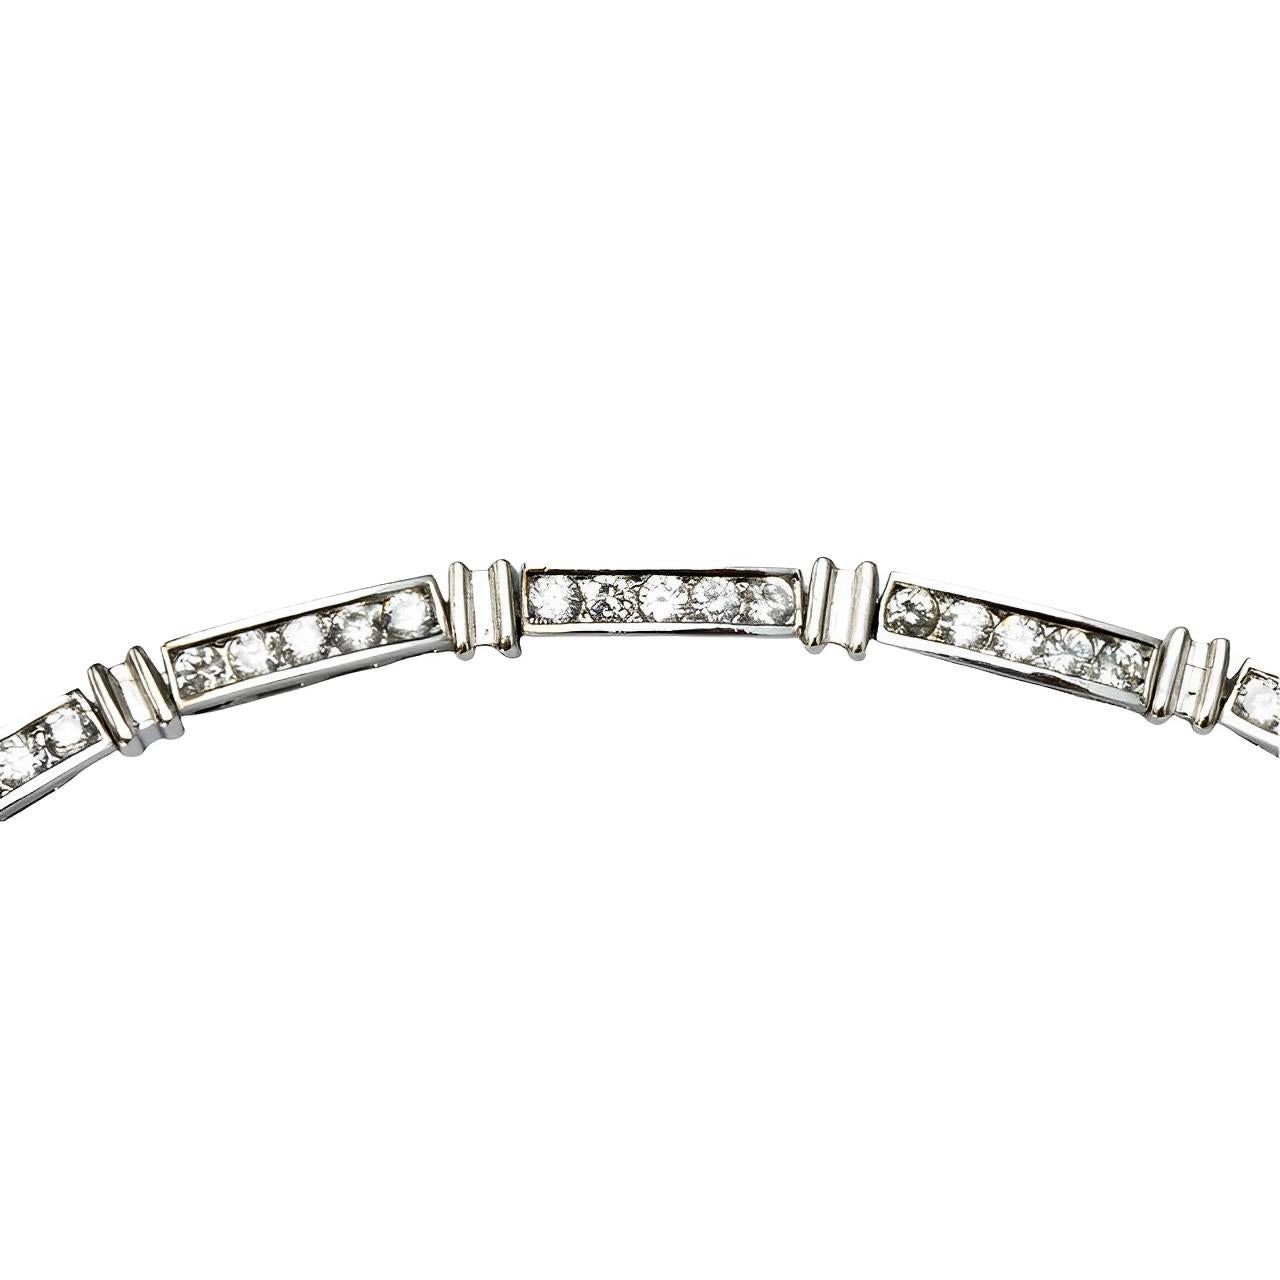 Silver Plated and Clear Rhinestone Link Bracelet circa 1980s In Good Condition For Sale In London, GB